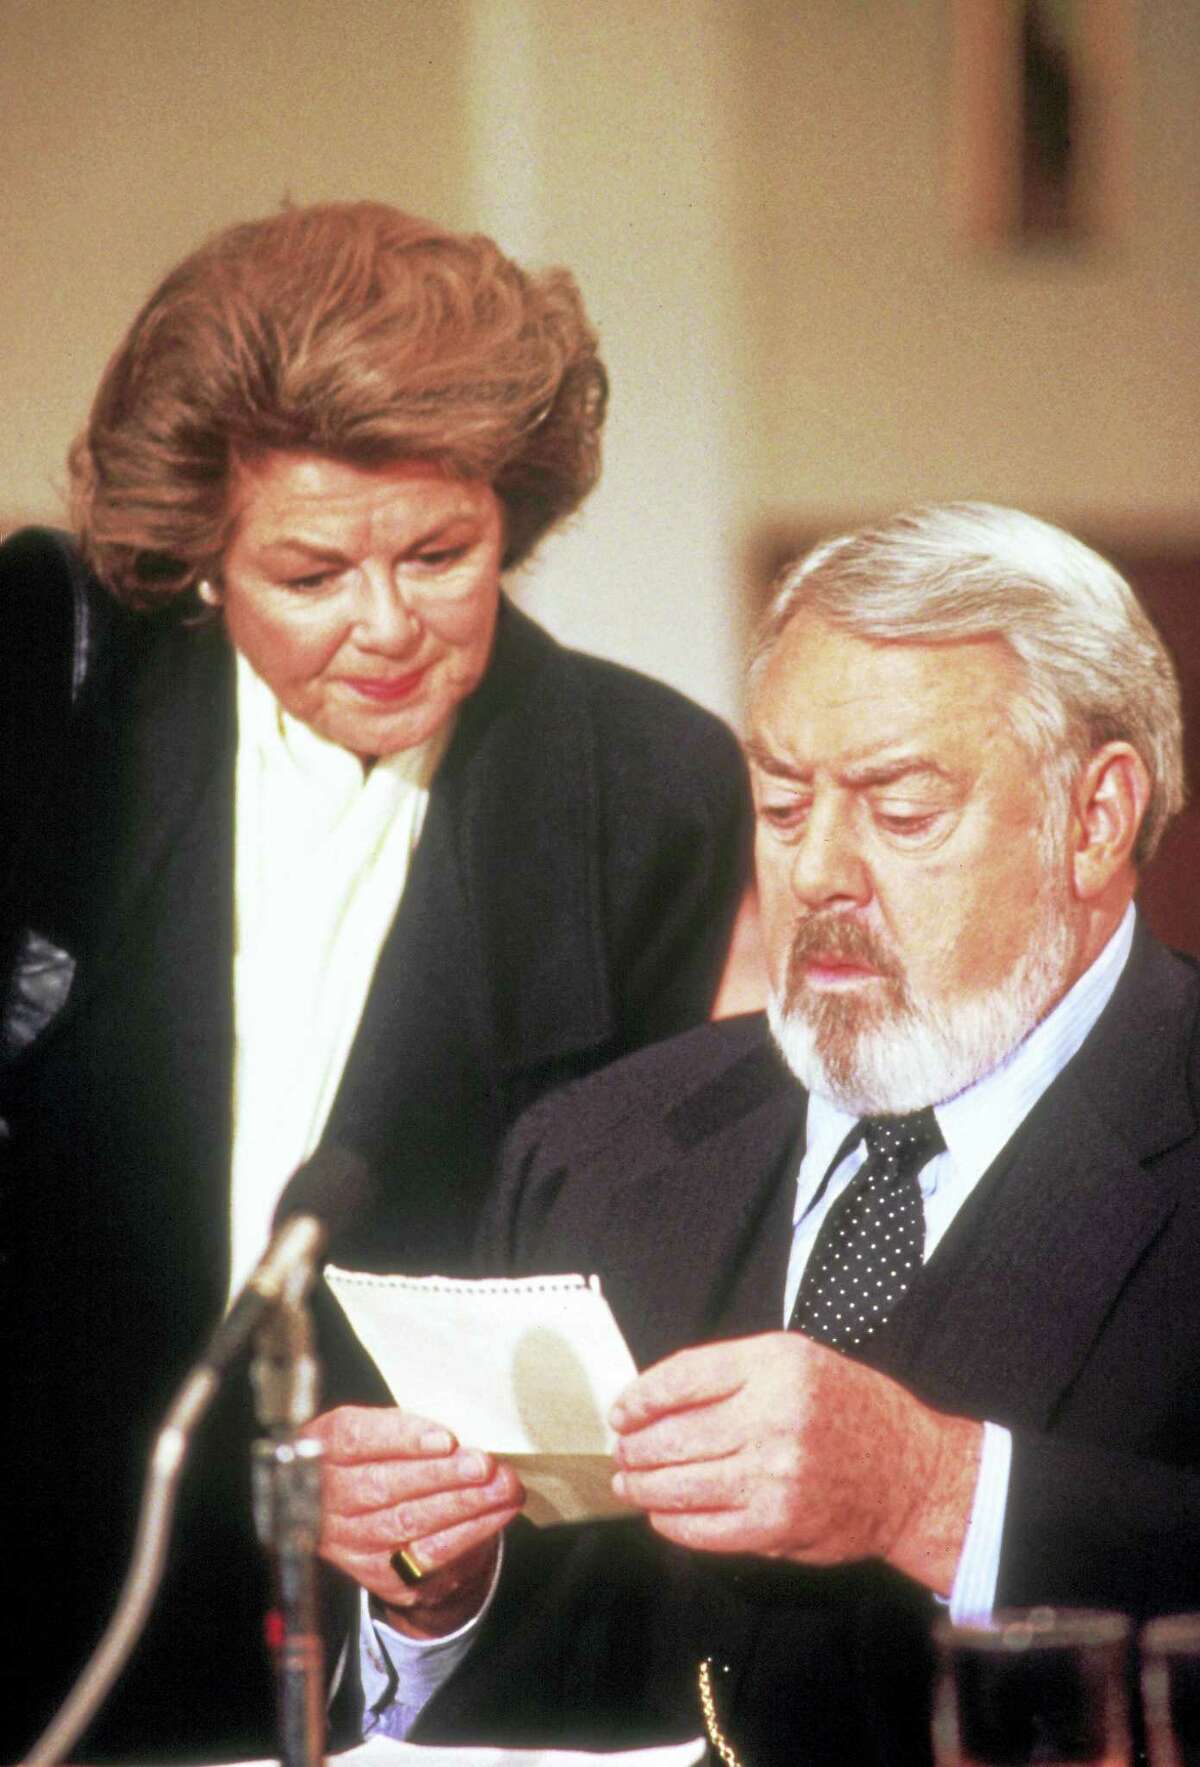 No Merchandising. Editorial Use Only. Film still from “Perry Mason: The Case of the Musical Murder” from 1992, with Barbara Hale as secretary Della Street and Raymond Burr as Perry Mason.